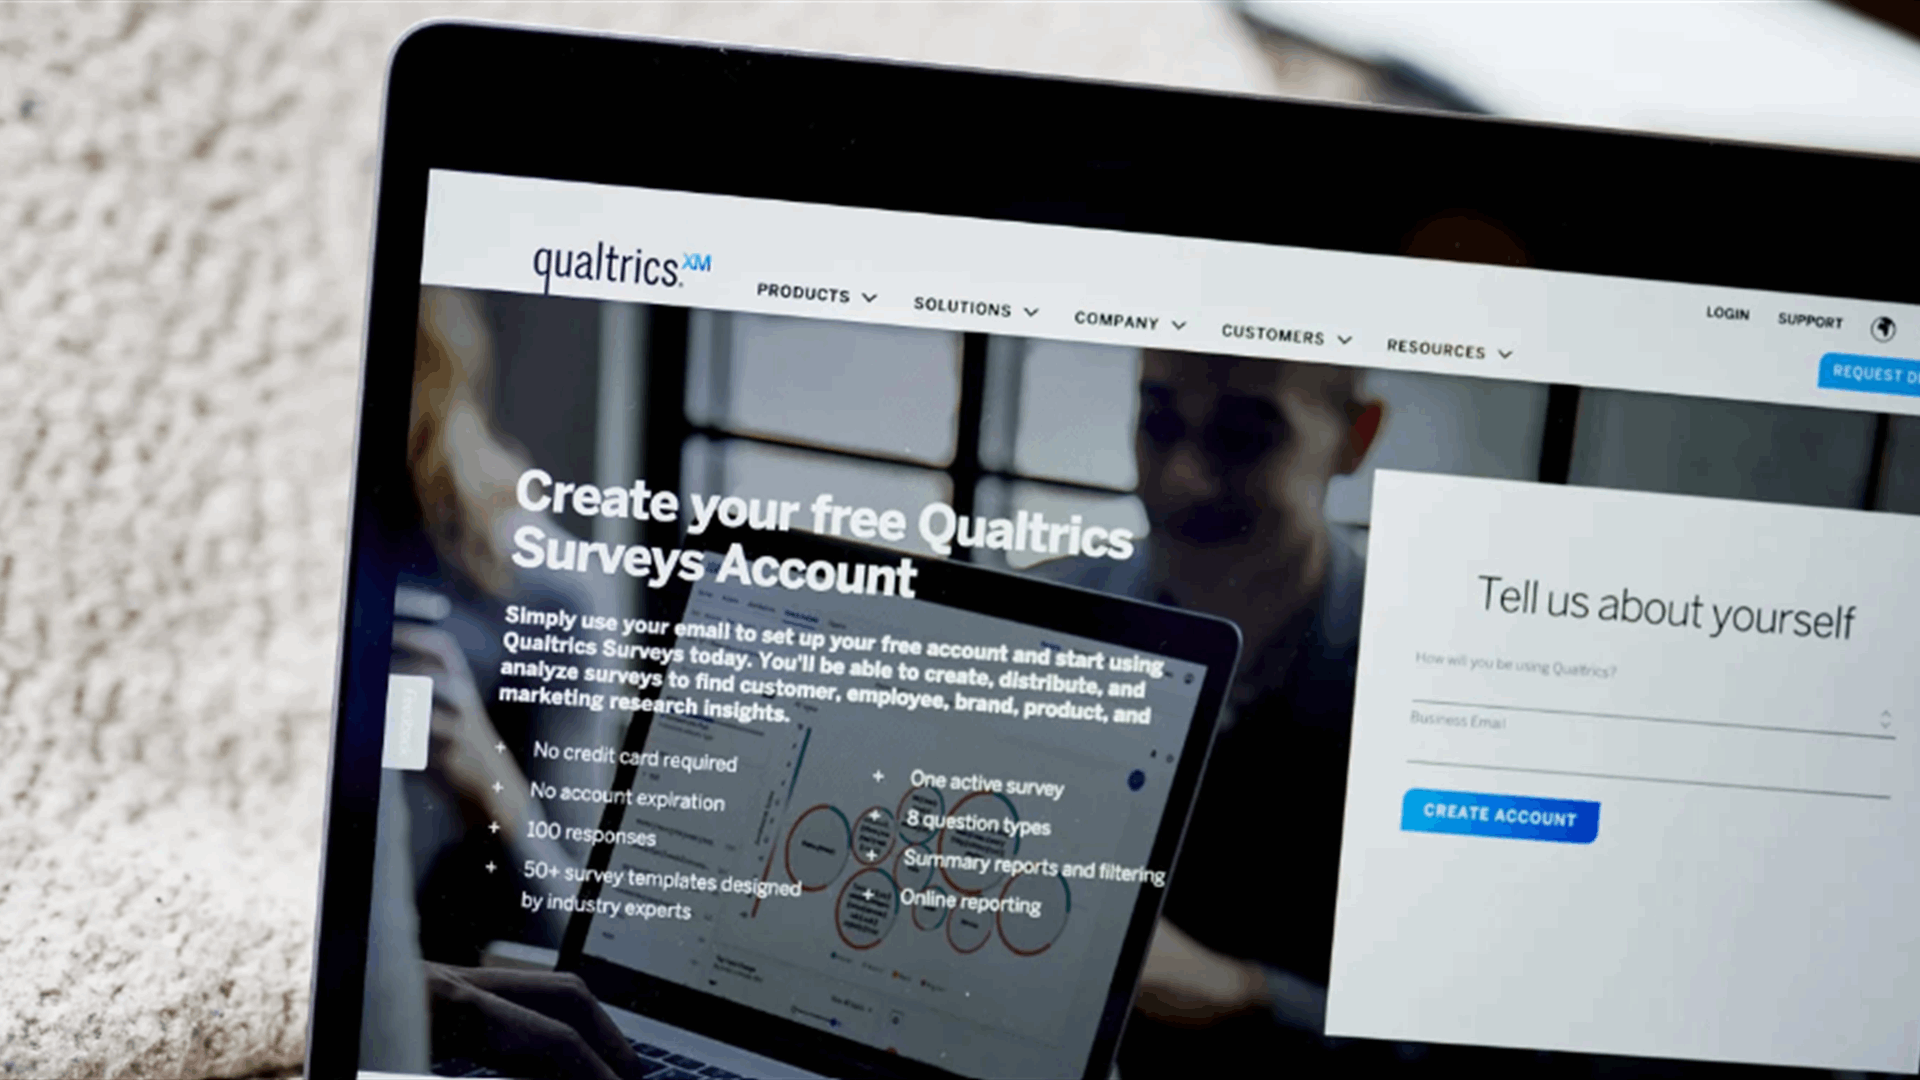 Qualtrics accepts $12.5B all-cash acquisition offer to go private